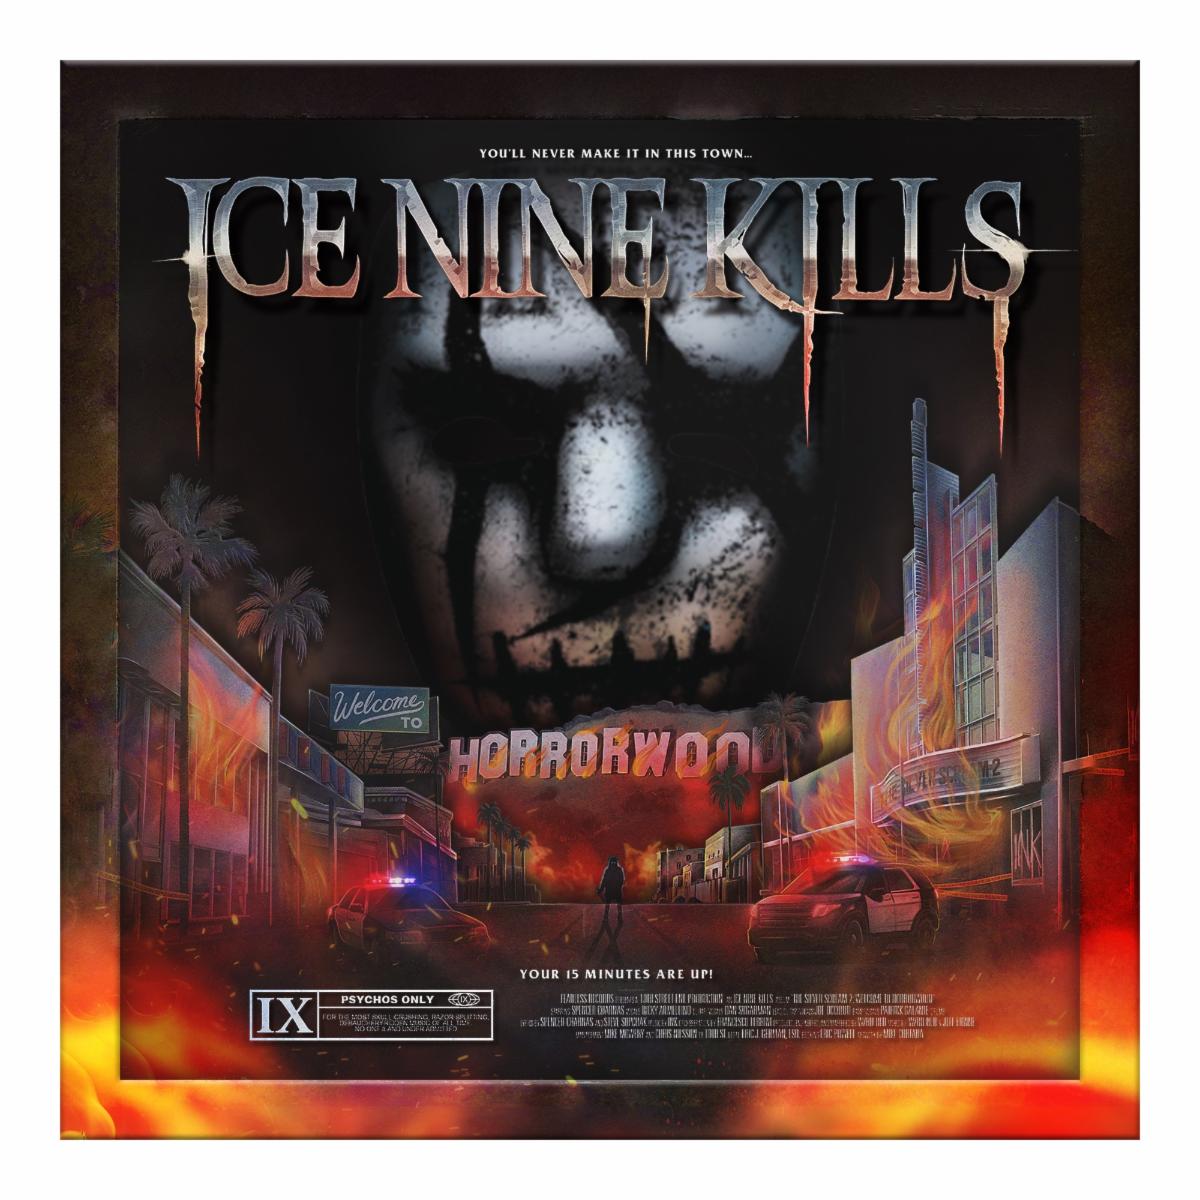 ICE NINE KILLS Announce' Welcome To Horrorwood Under Fire'- A 3LP Deluxe Edition of Chart-Topping Album 'The Silver Scream 2: Welcome To Horrorwood'